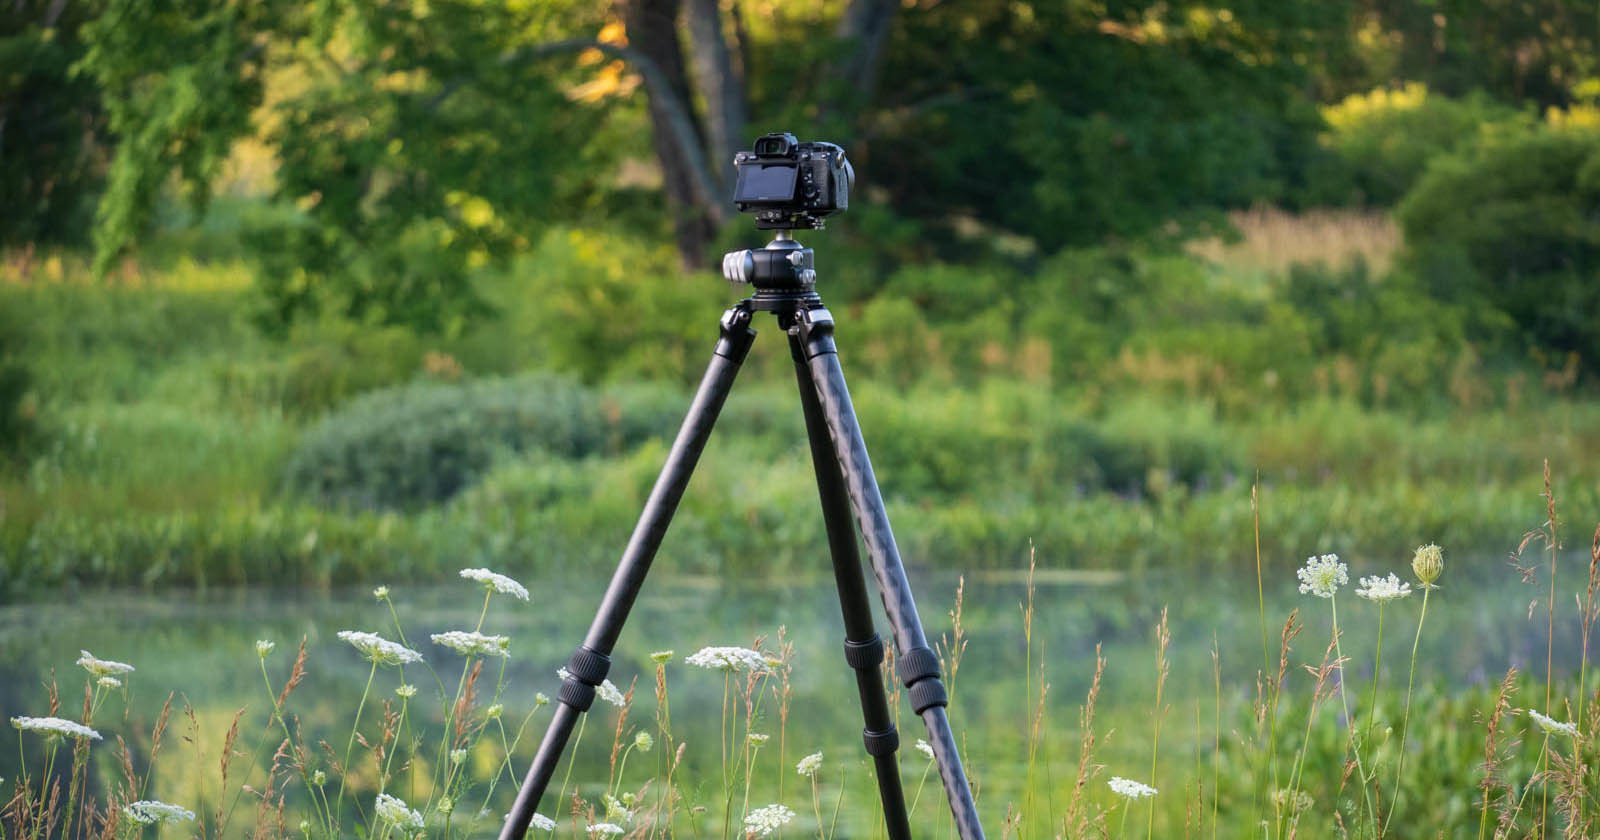 The Beginner’s Guide to Tripods